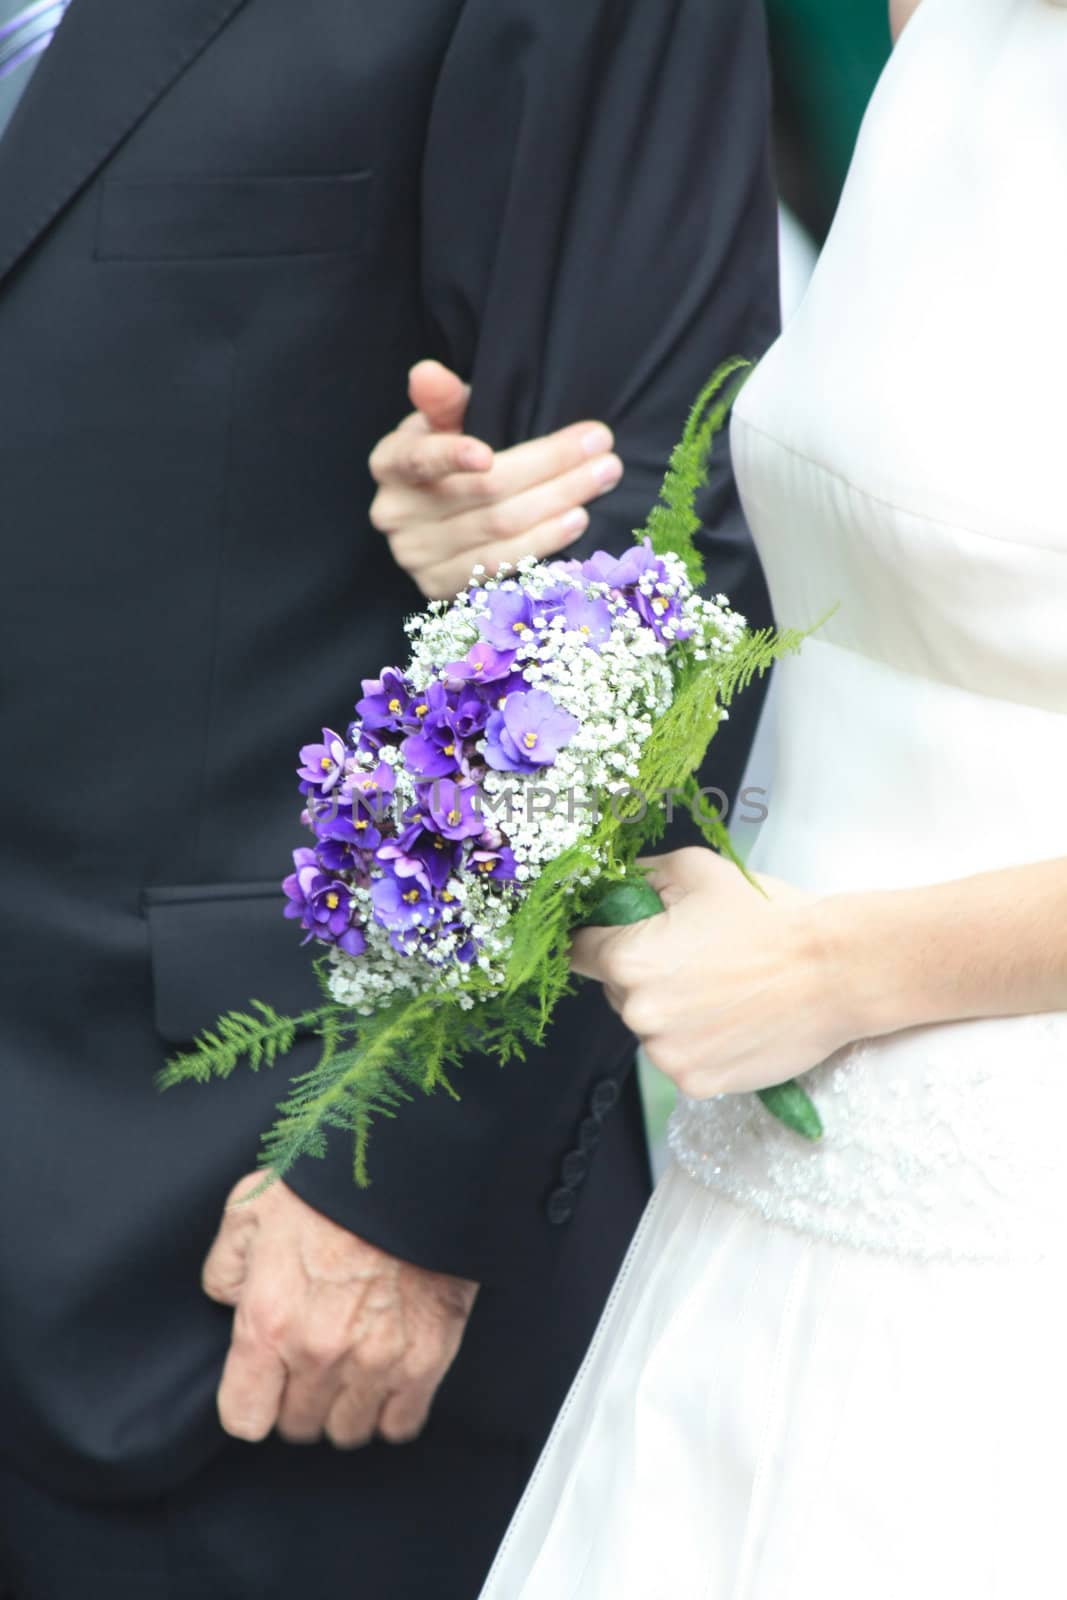 A bride walking to the church, holding her purple wedding bouquet